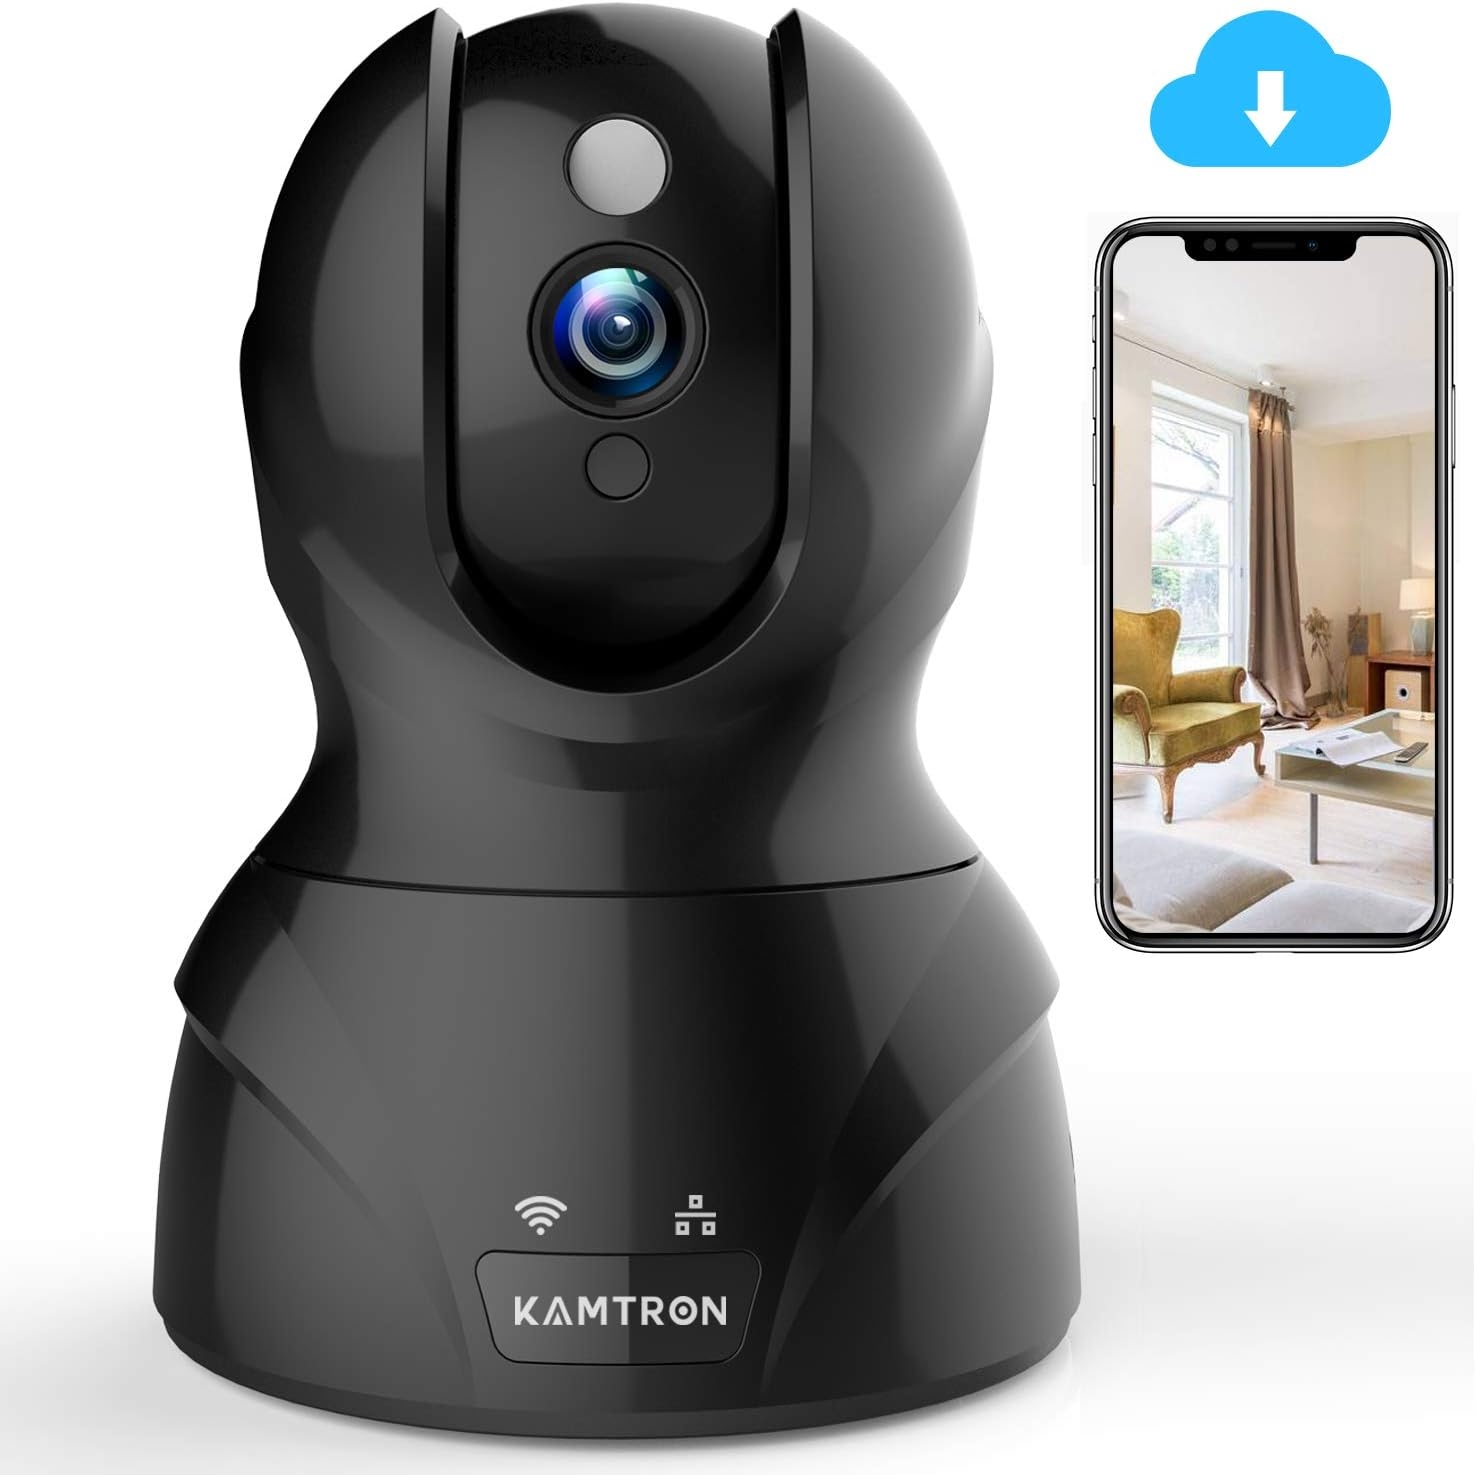 Wireless Security Camera with Two-way Audio - KAMTRON 1080P HD WiFi Security Surveillance IP Camera Home Baby Monitor with Motion Detection Night Vision, Black